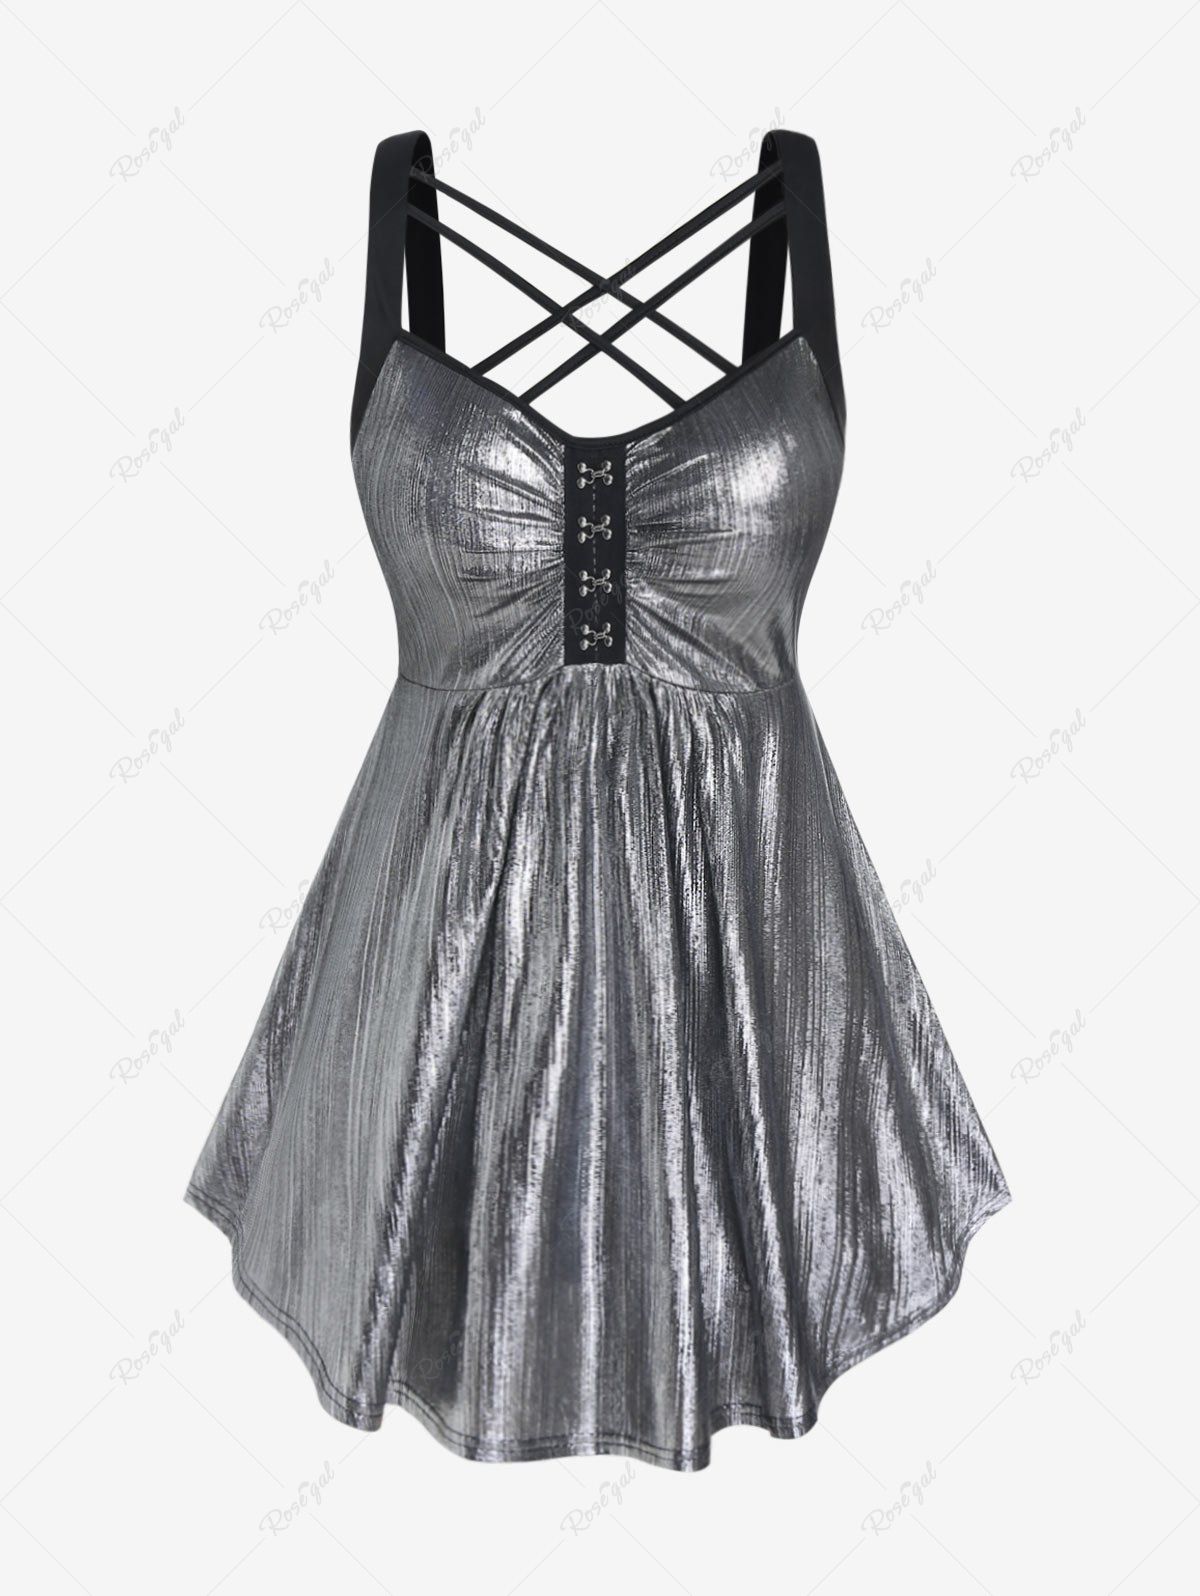 Hot Plus Size Crisscross Strappy Backless Metal Tunic Top  